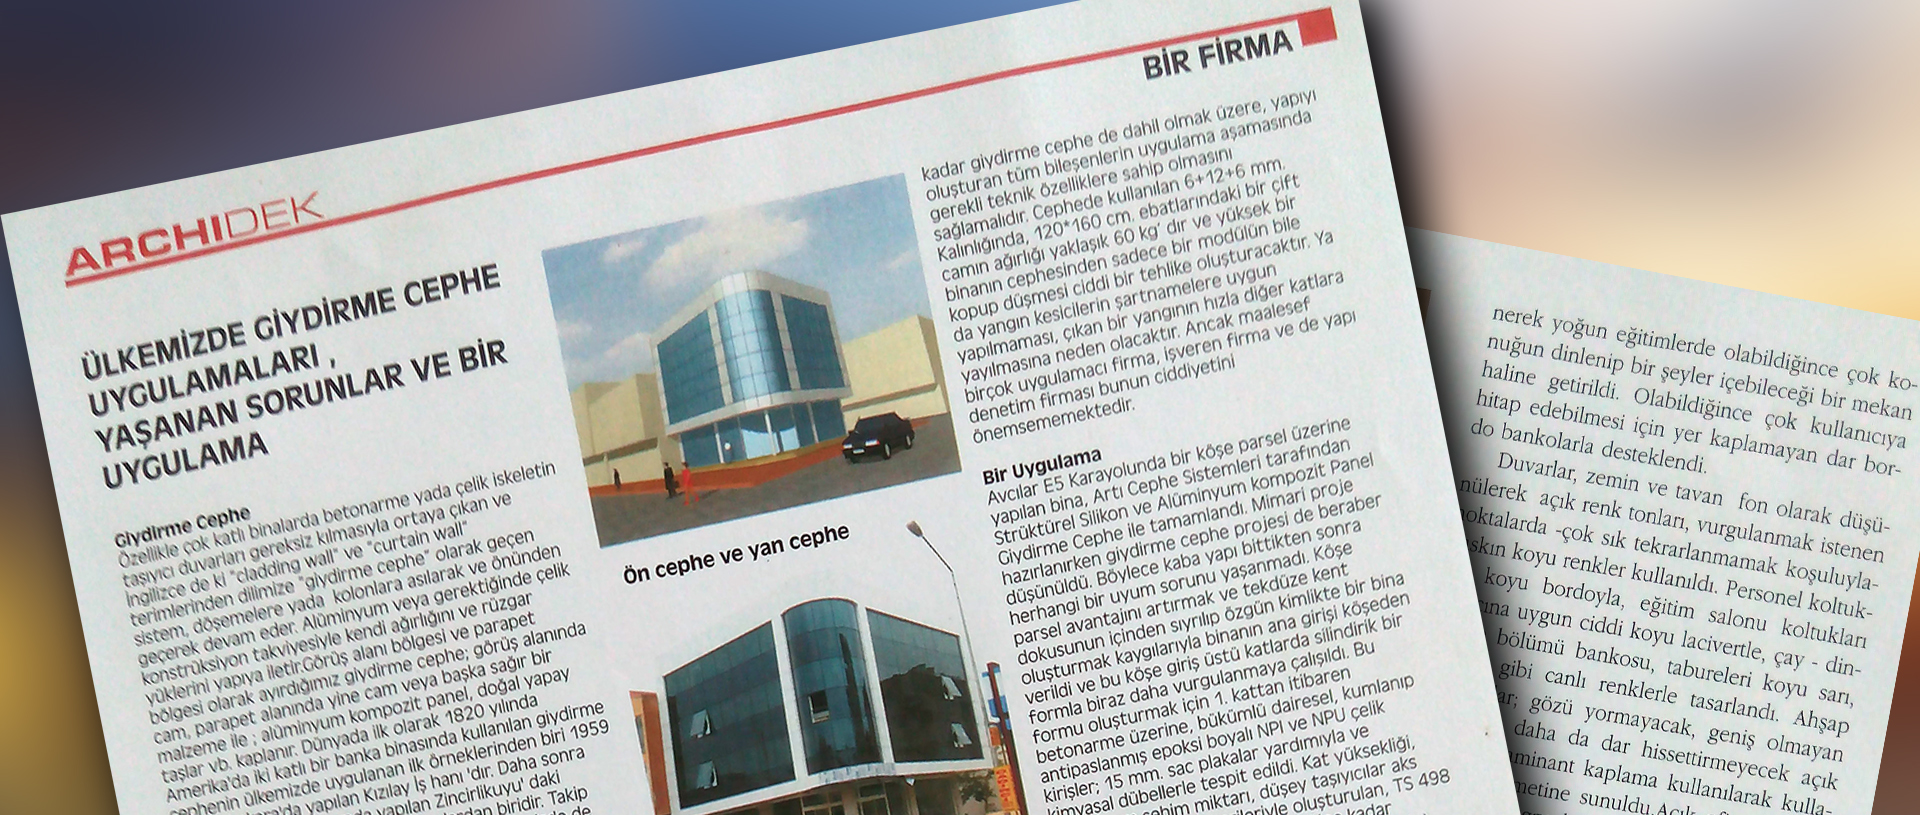 CURTAIN WALL APPLICATIONS IN OUR COUNTRY ( ARCHIDEK MAGAZINE)